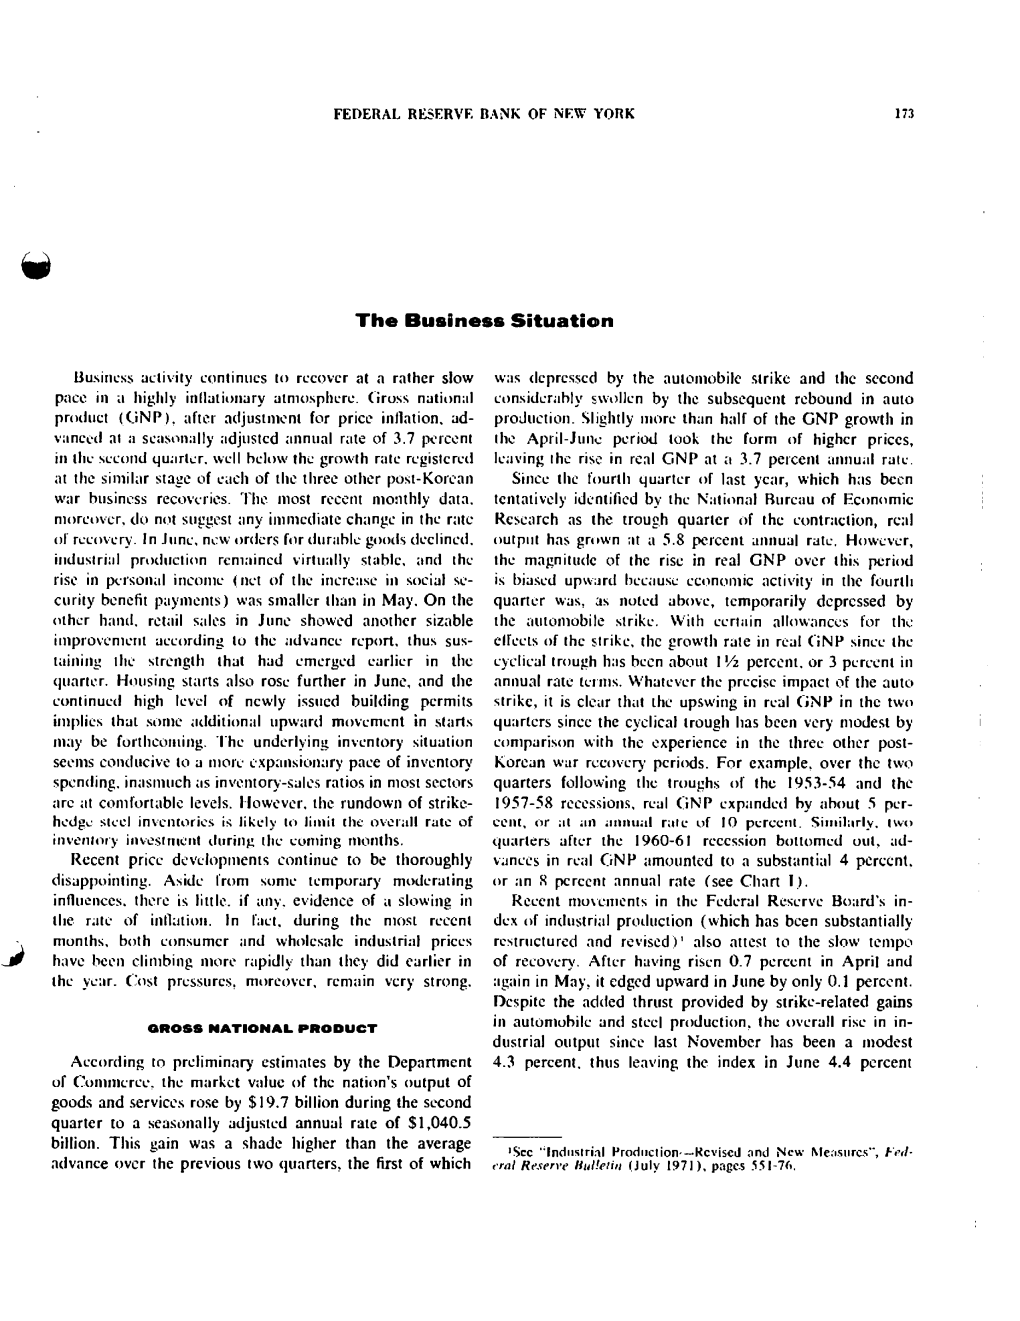 The Business Situation, August 1971